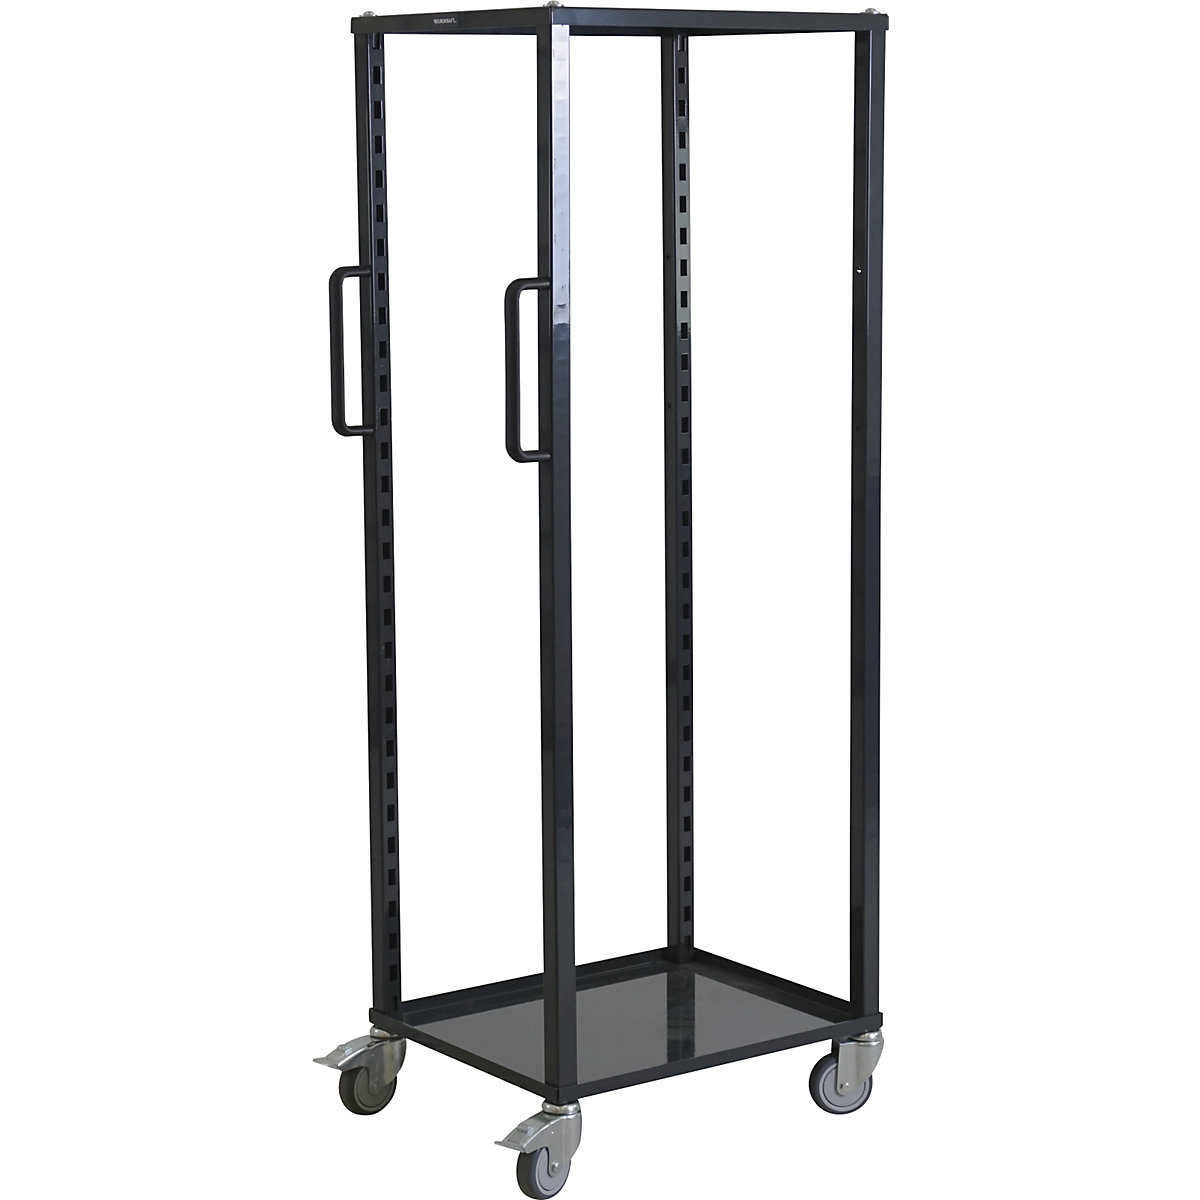 CustomLine Euro platform trolley – eurokraft pro, for containers LxW 600 x 400 mm, without boxes, grey-1